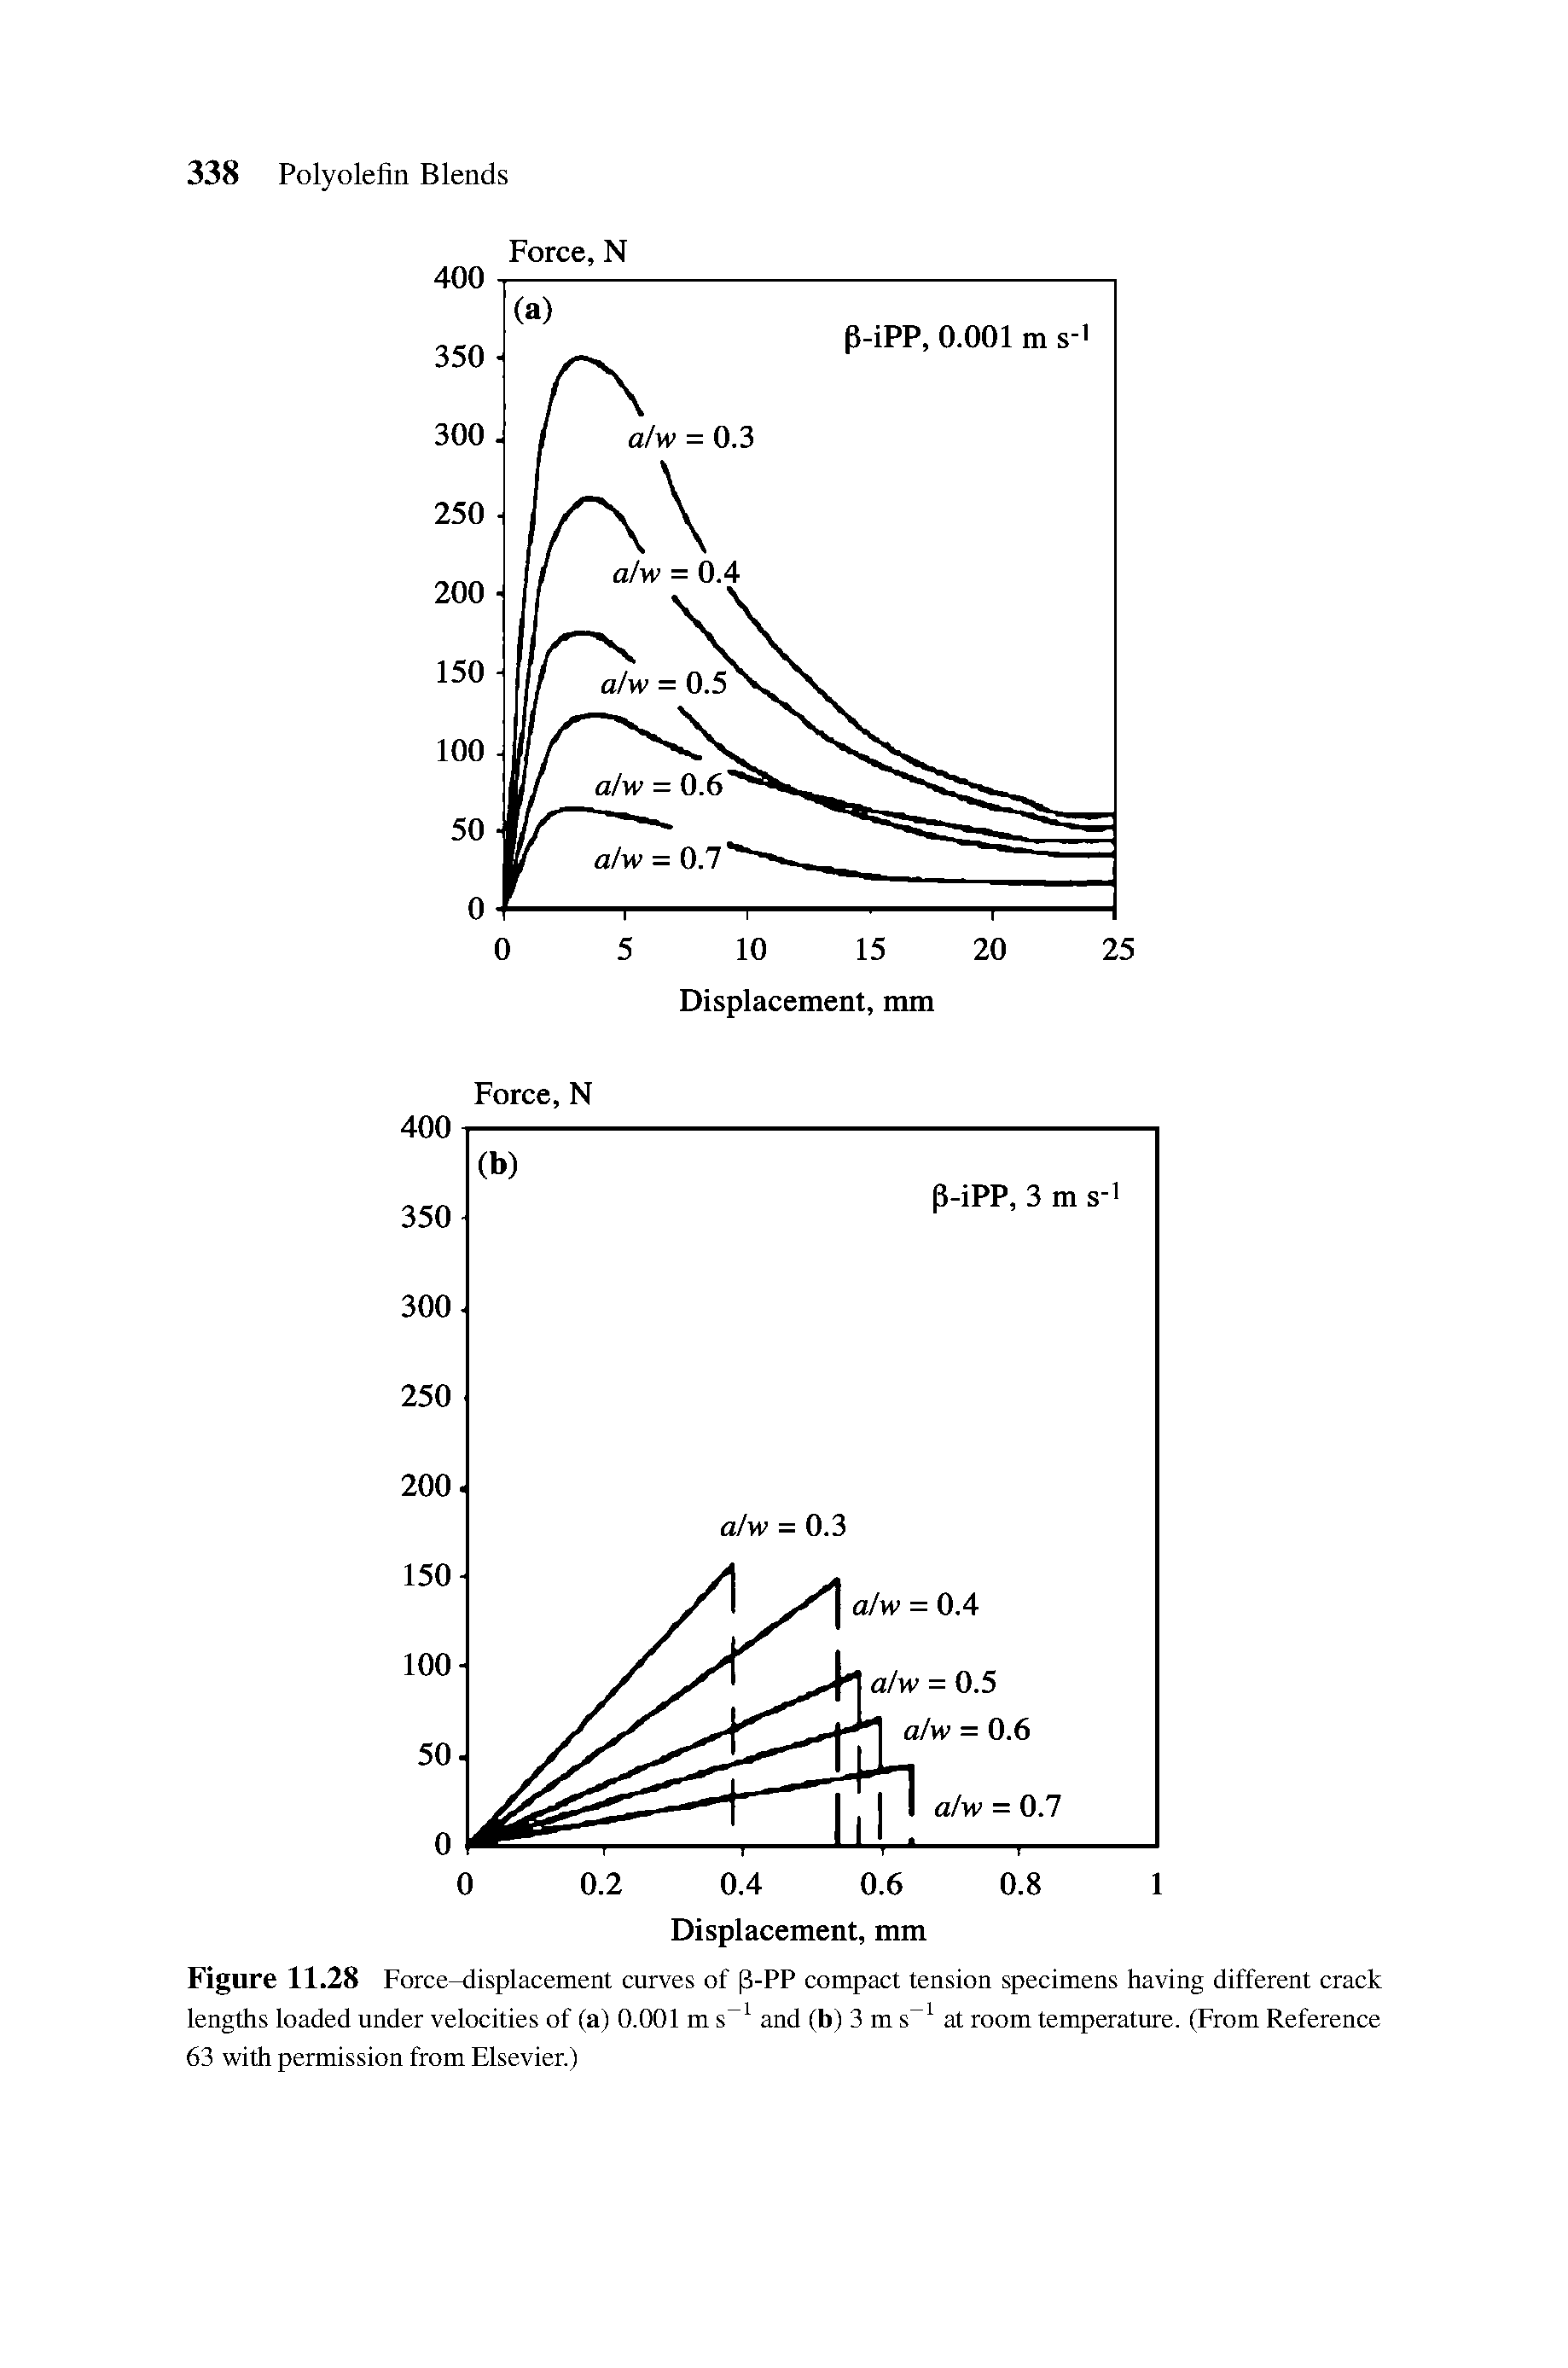 Figure 11.28 Force-displacement curves of (3-PP compact tension specimens having different crack lengths loaded under velocities of (a) 0.001 m and (b) 3 m at room temperature. (From Reference 63 with permission from Elsevier.)...